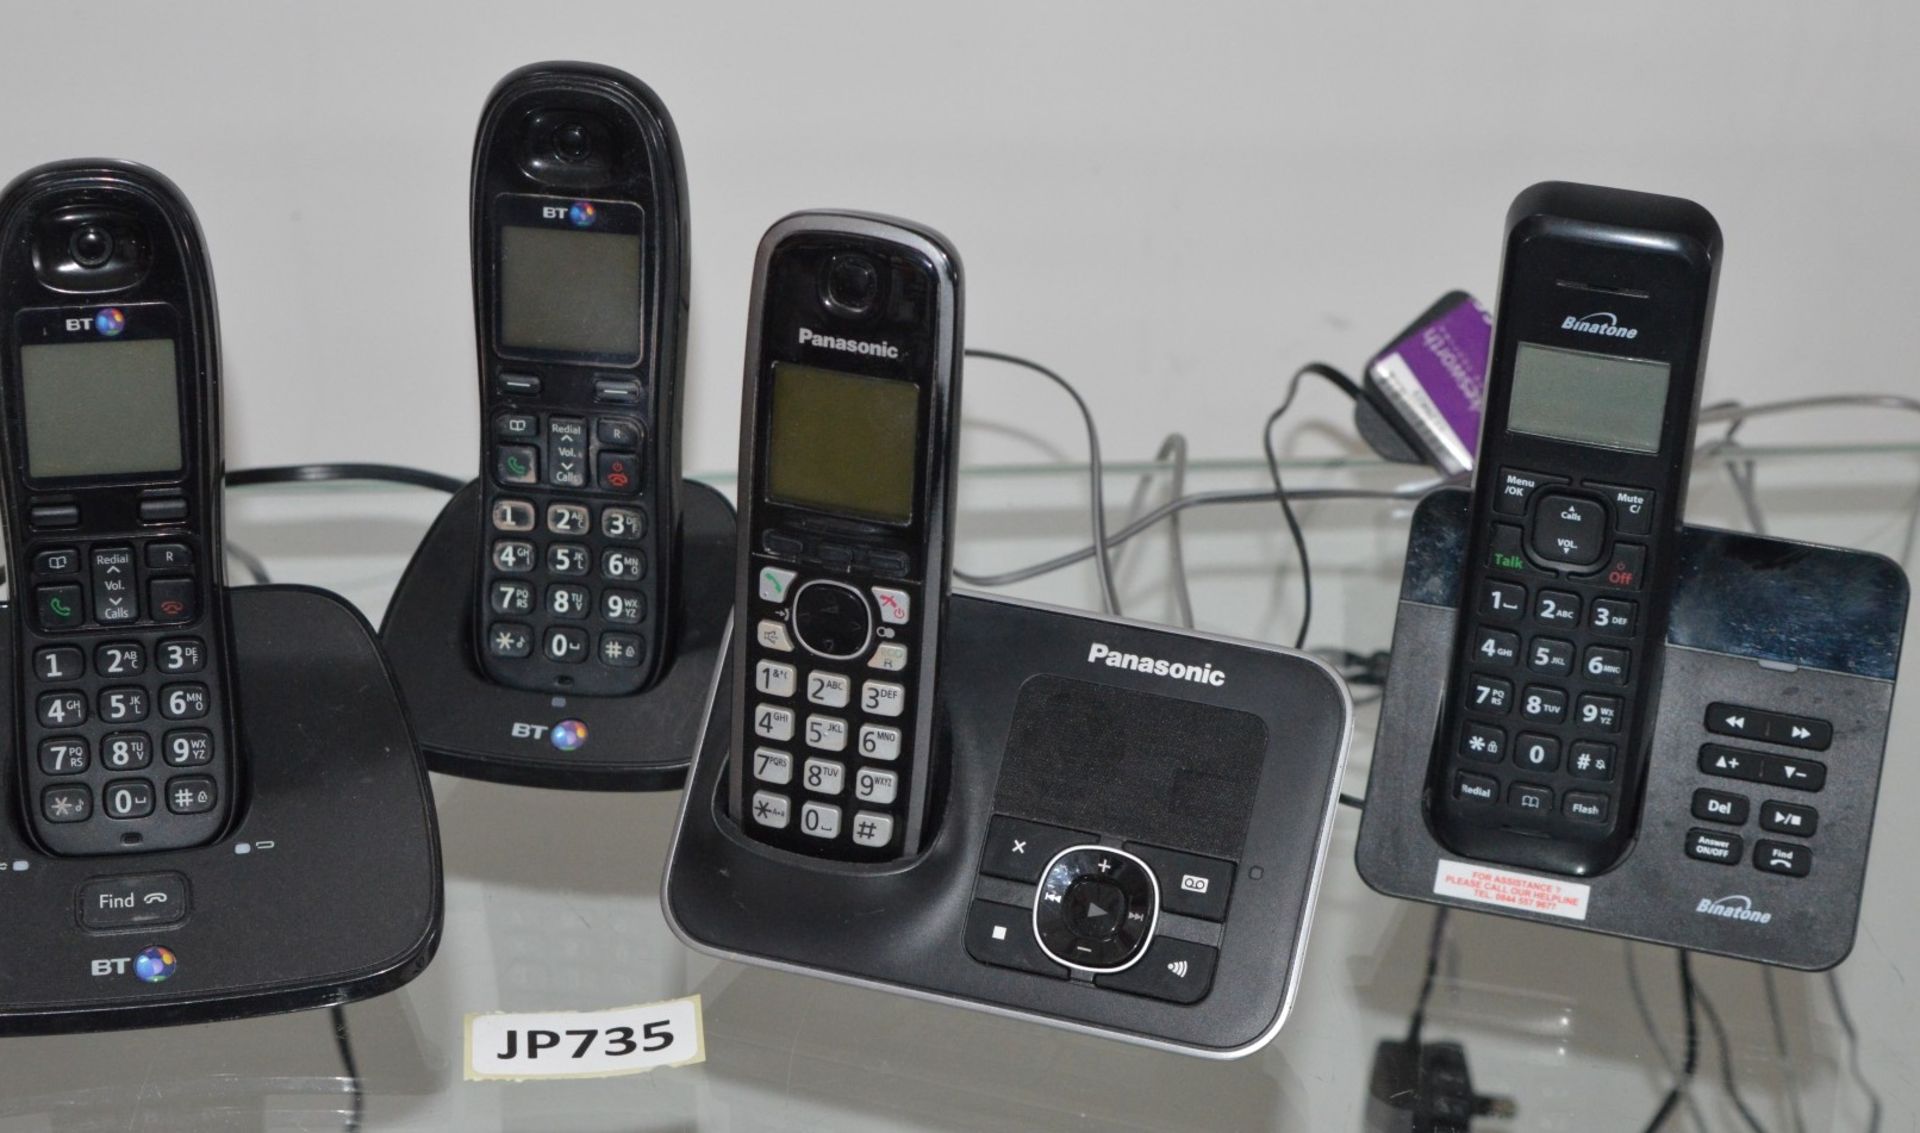 6 x Cordless Phone Handsets - Includes BT, Binatone and Panasonic Models - CL285 - Ref JP735 - - Image 4 of 4